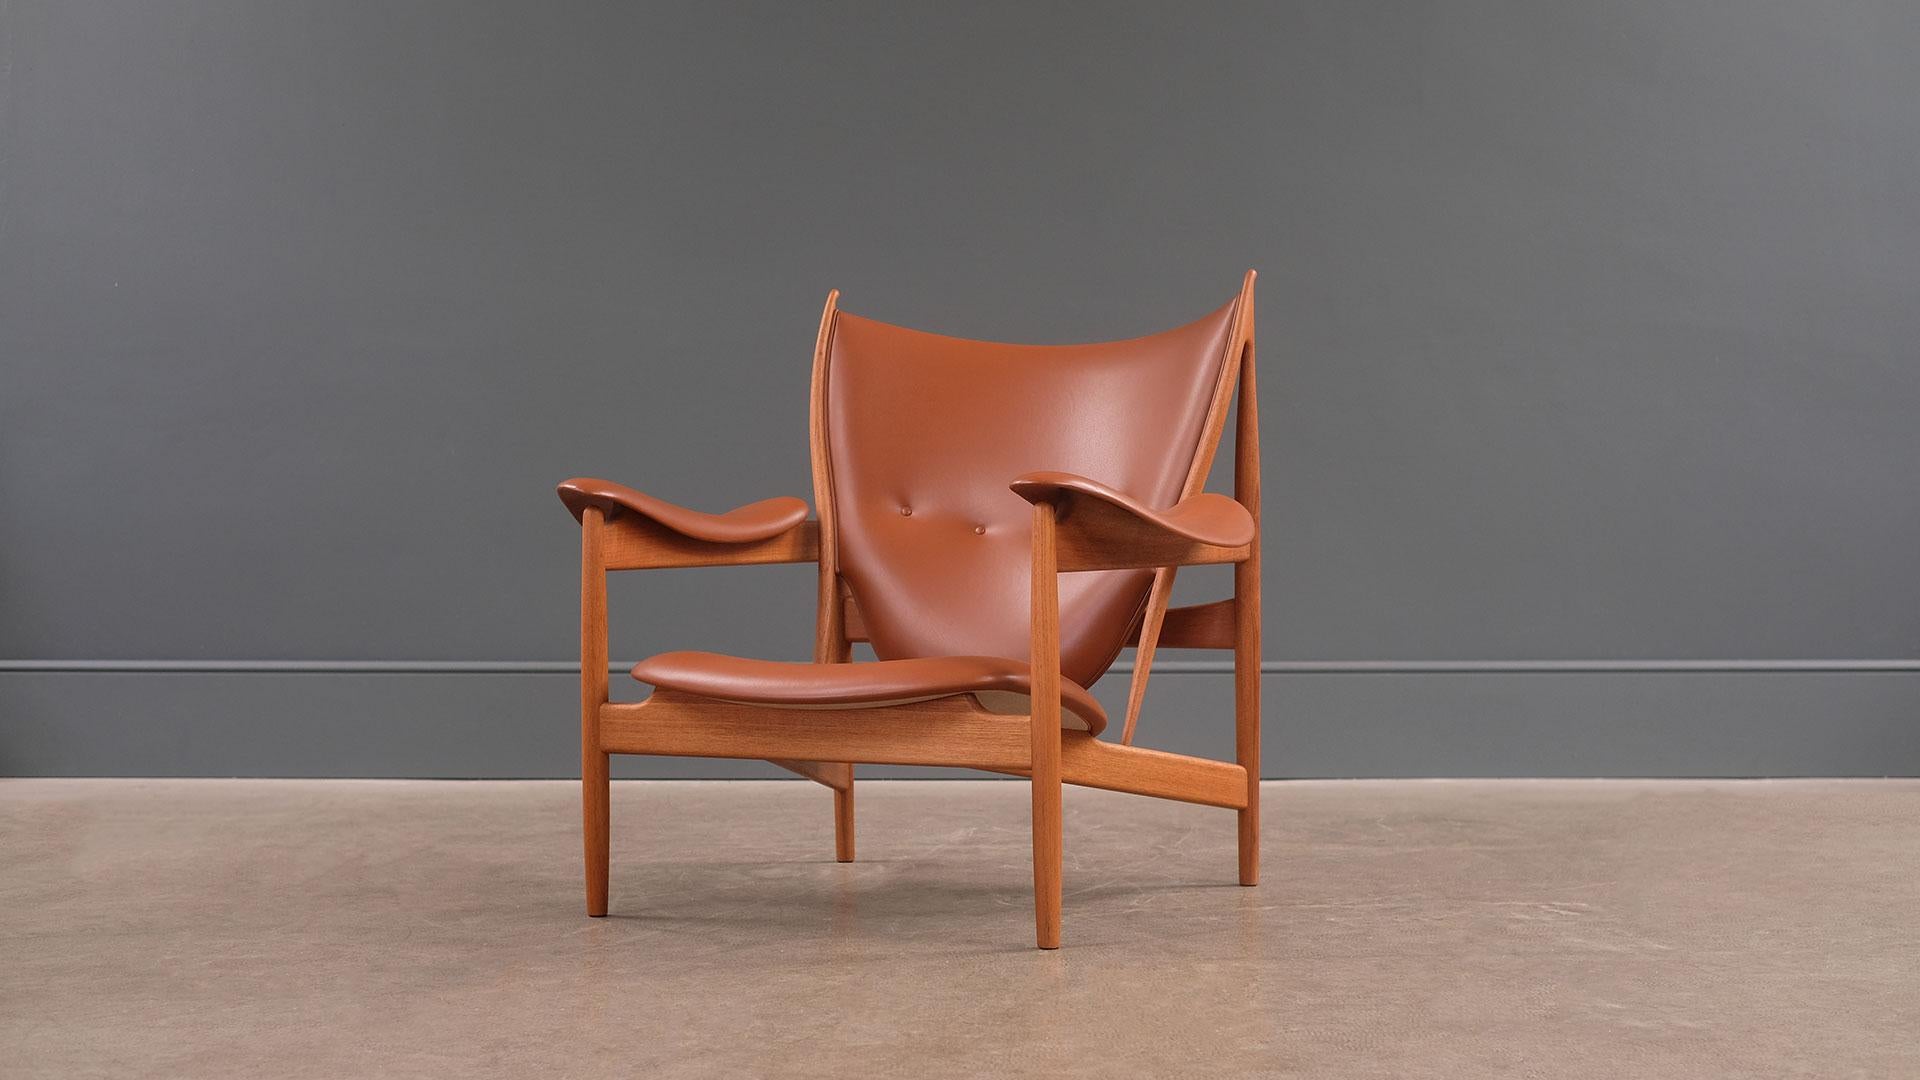 Legendary Chieftain chair designed by Finn Juhl. This example in wonderful solid teak (no longer in production) and made by One Collection. Approximately 5 years old. Fantastic and rare opportunity to acquire this amazing armchair.